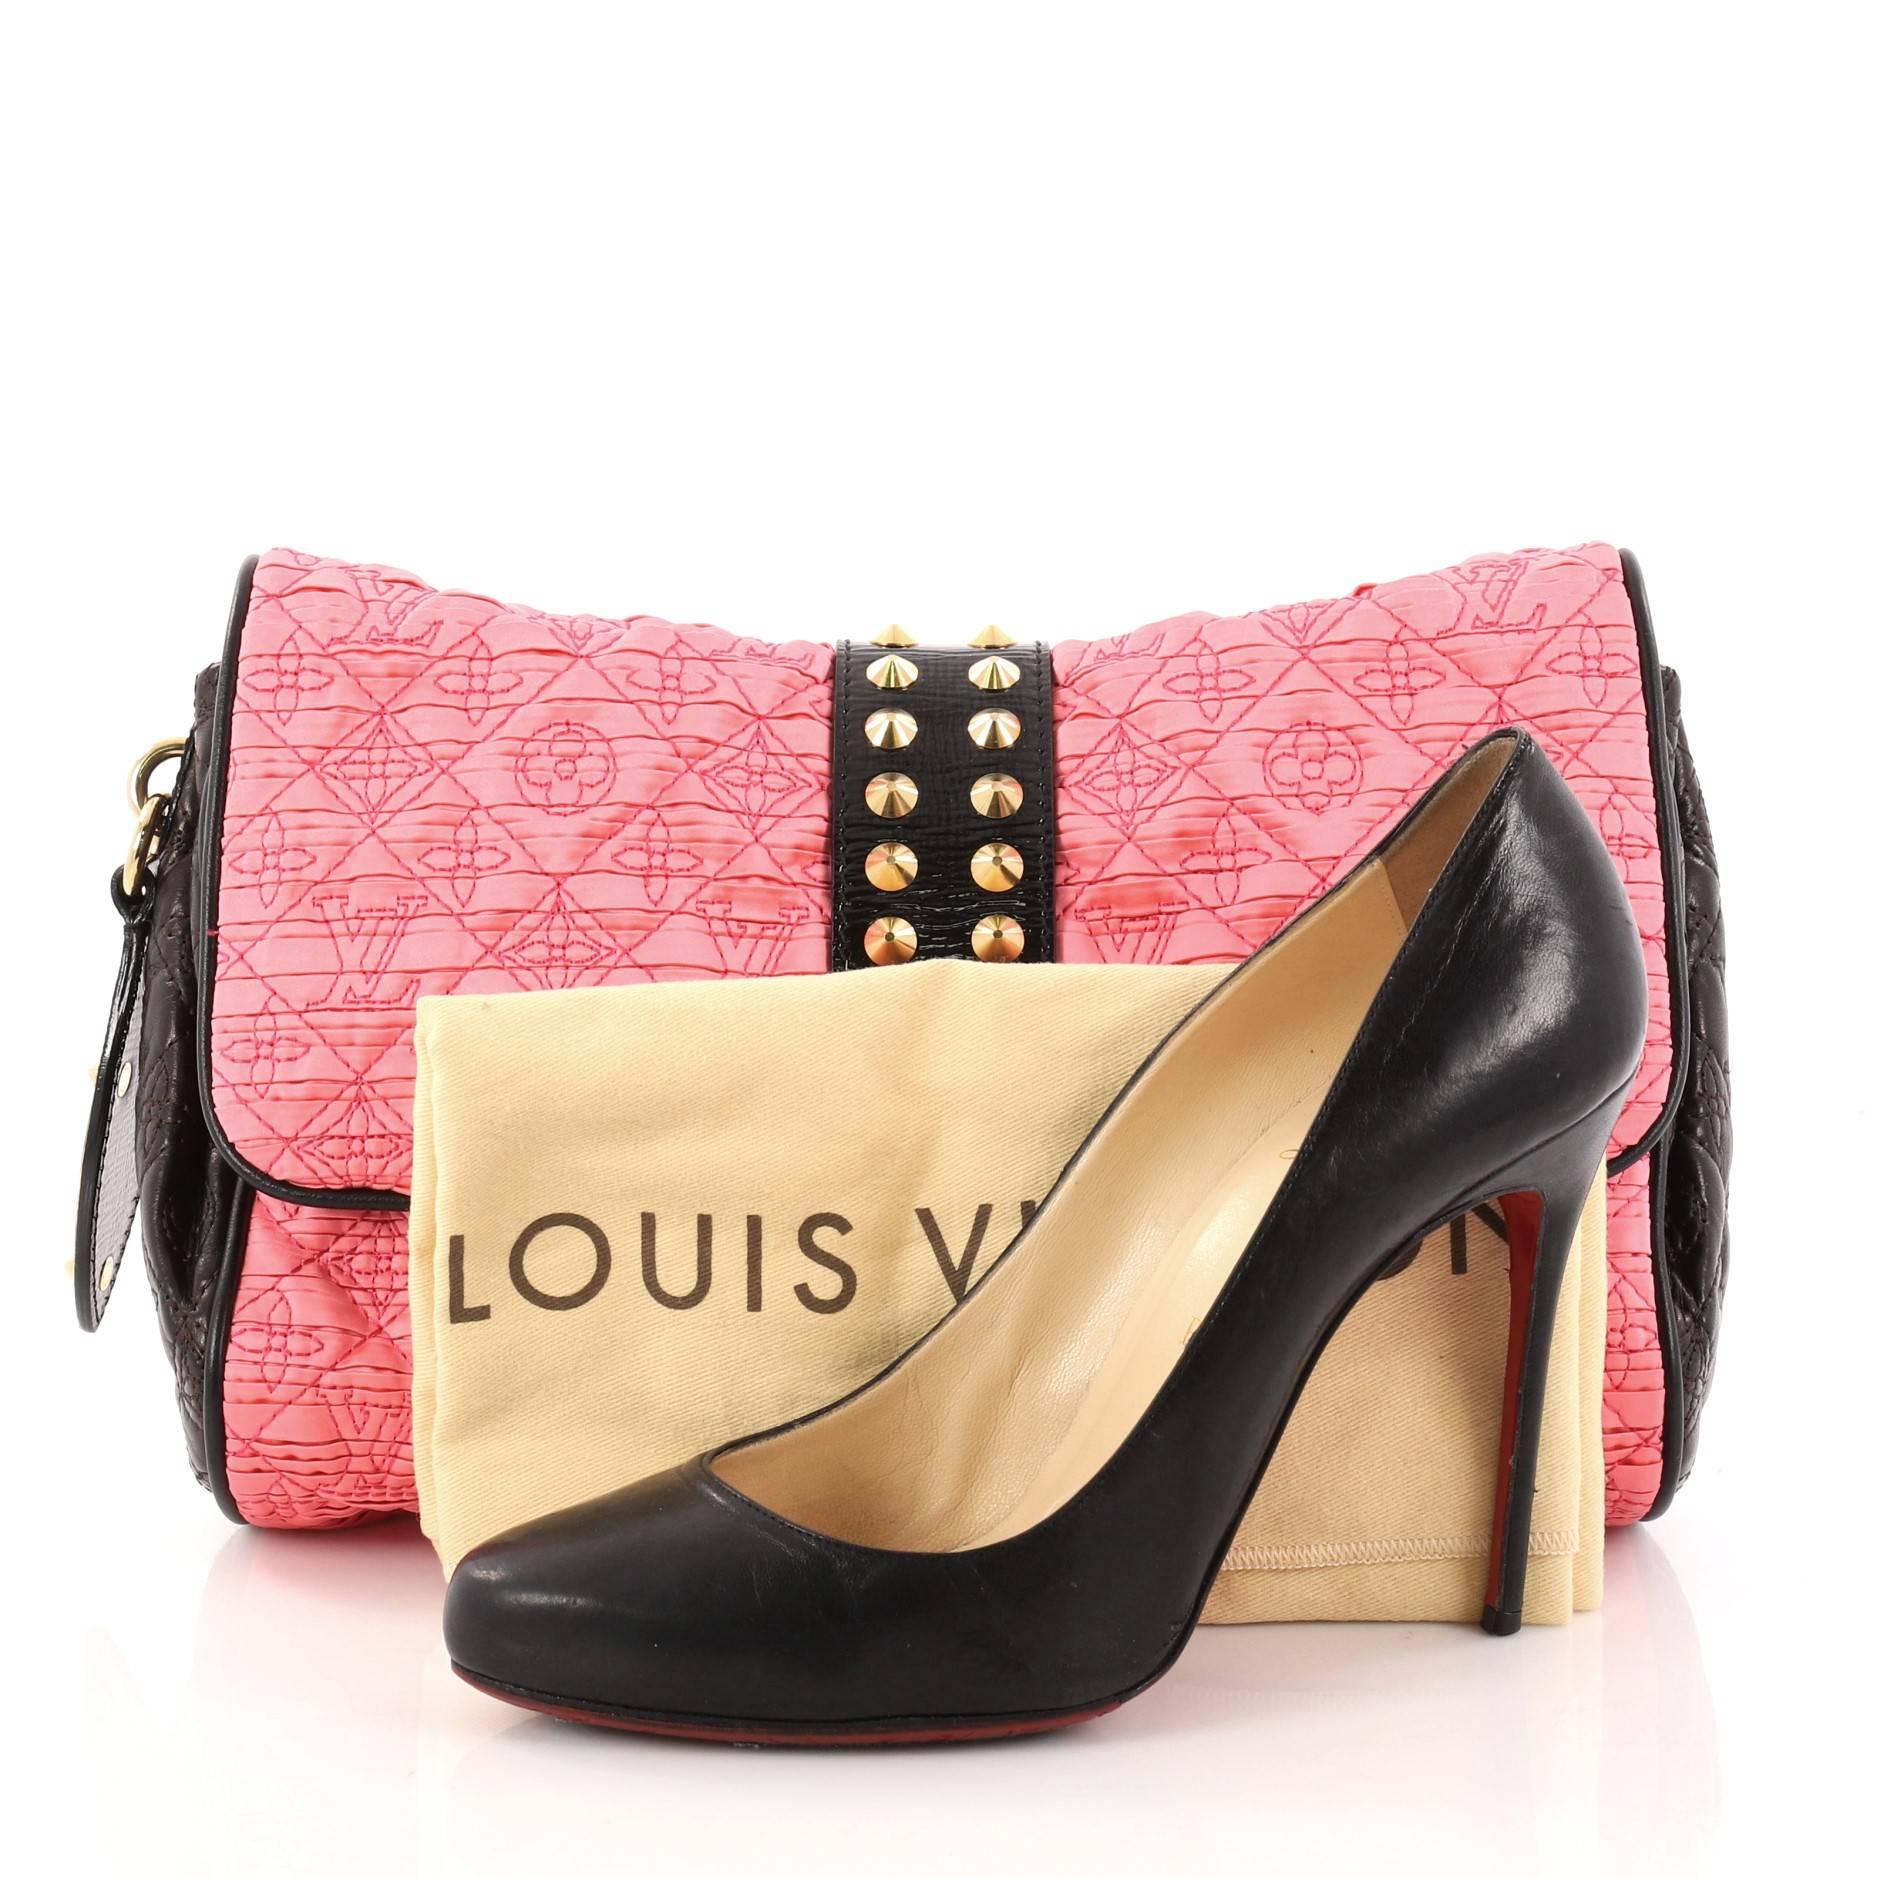 This authentic Louis Vuitton Coquette Handbag Monogram Satin is a marvelous clutch perfect for your nights out. Crafted in pink embroidered diamond quilted satin, this stunning bag features black monogram embroidered diamond quilted sides,